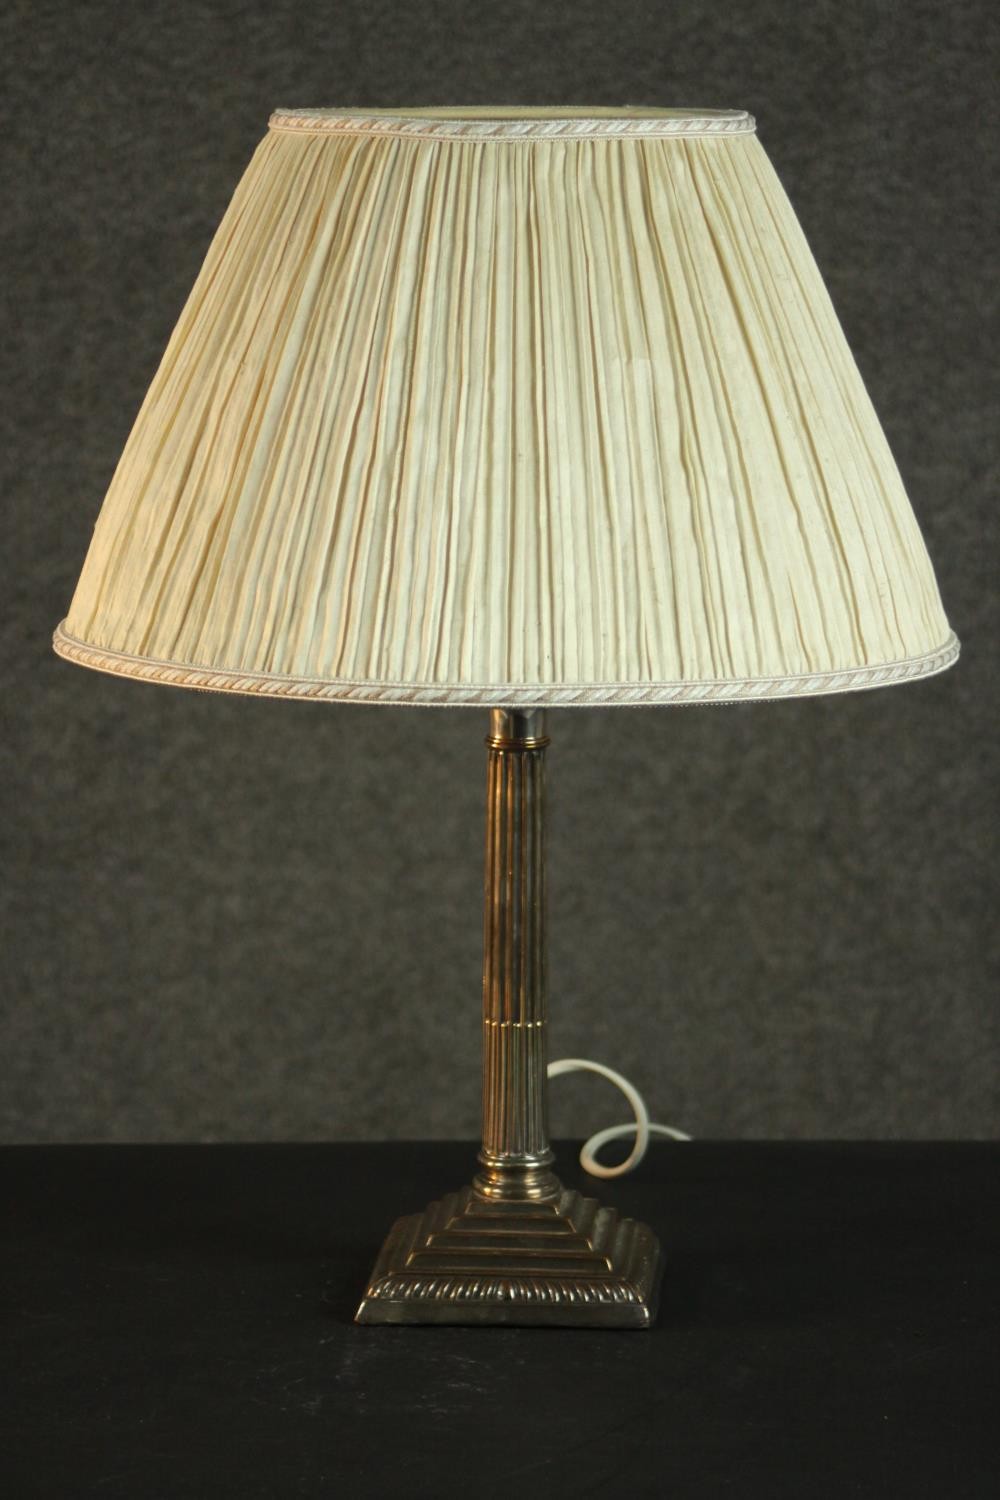 A silver plated Classical column candlestick, converted to a table lamp, with a square step-down